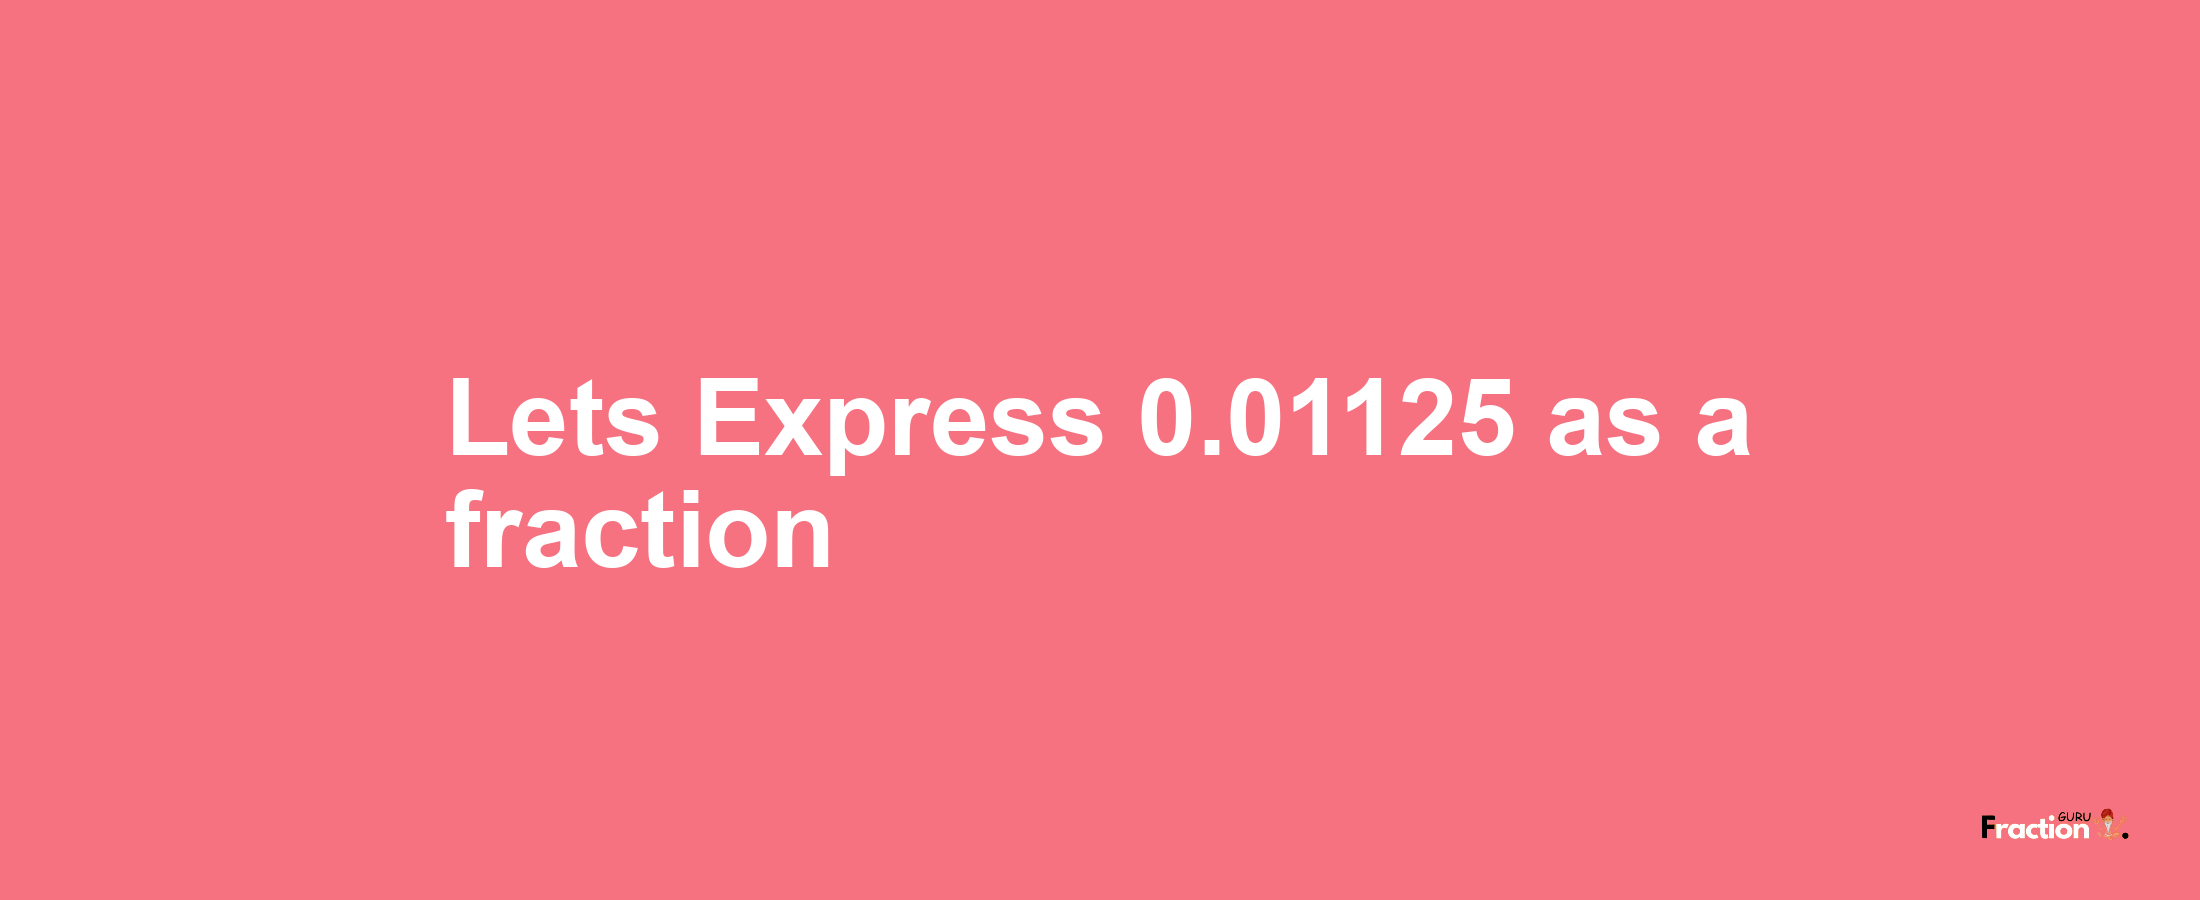 Lets Express 0.01125 as afraction